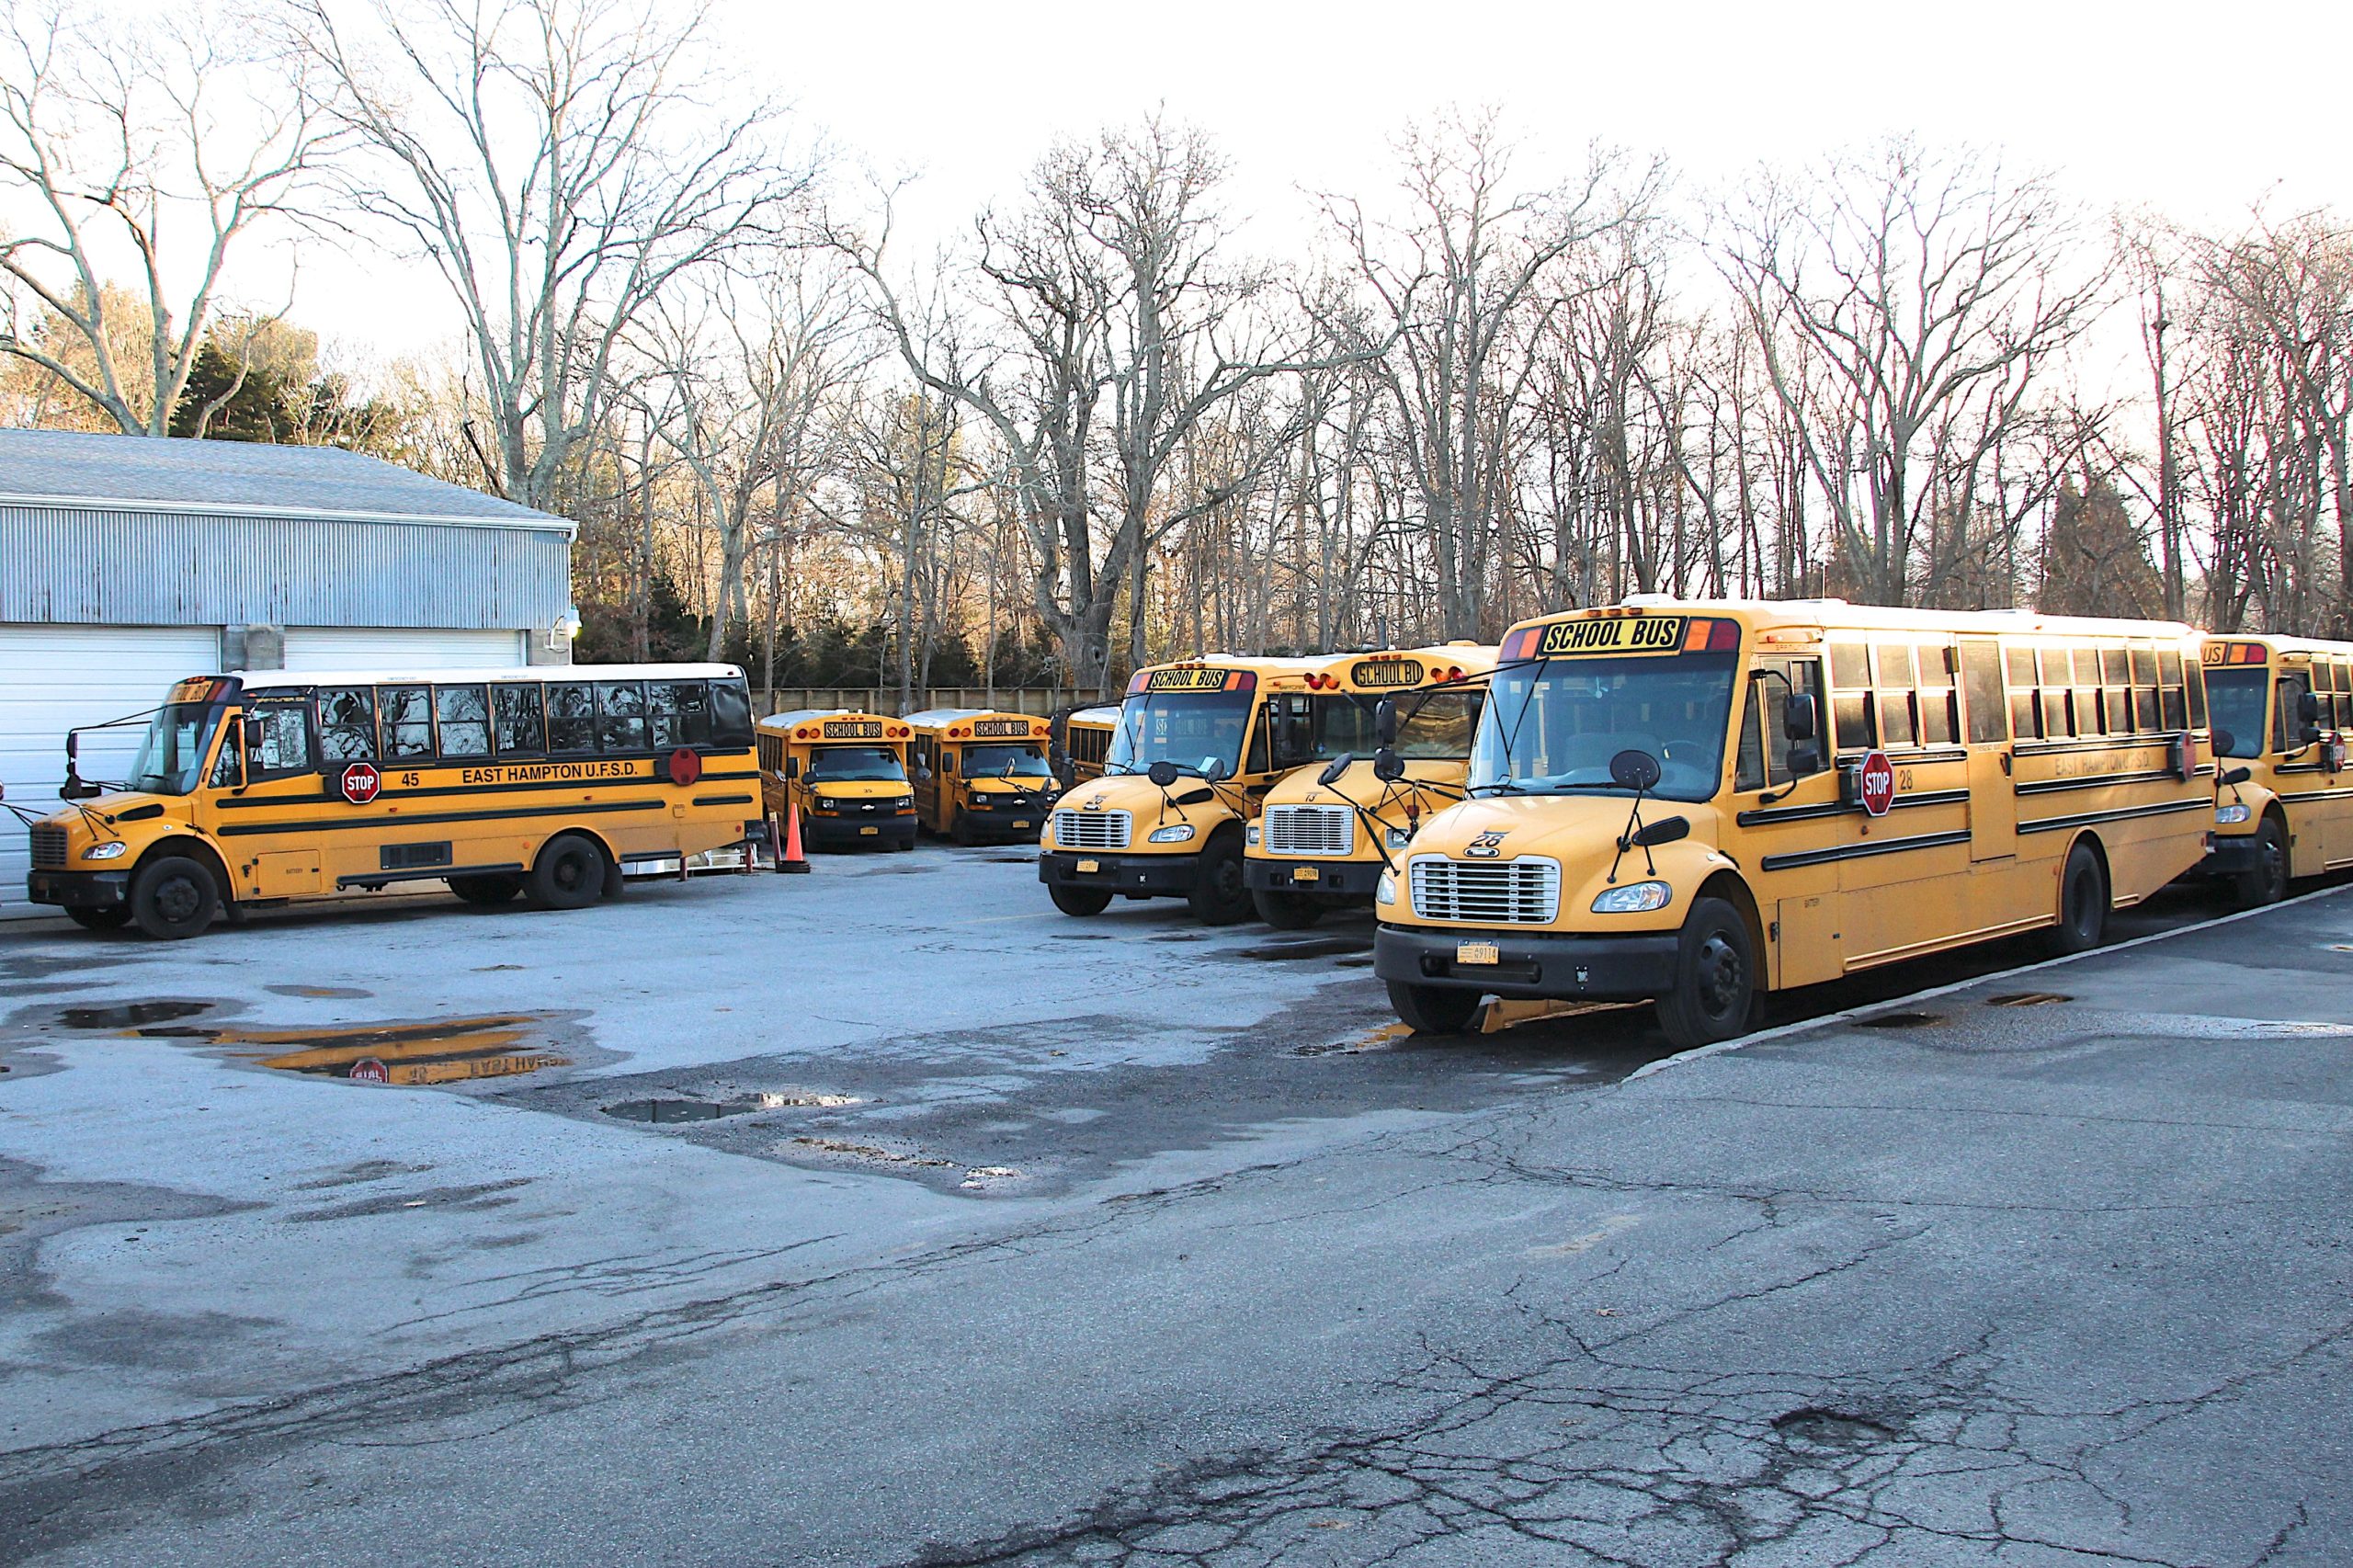 The East Hampton School District has been leasing the former Schaefer Bus Company property on Route 114 to store its bus fleet. The district will be moving the operation to property it approached next to the East Hampton Town Recycling Center on Springs-Fireplace Road. Kyril Bromley